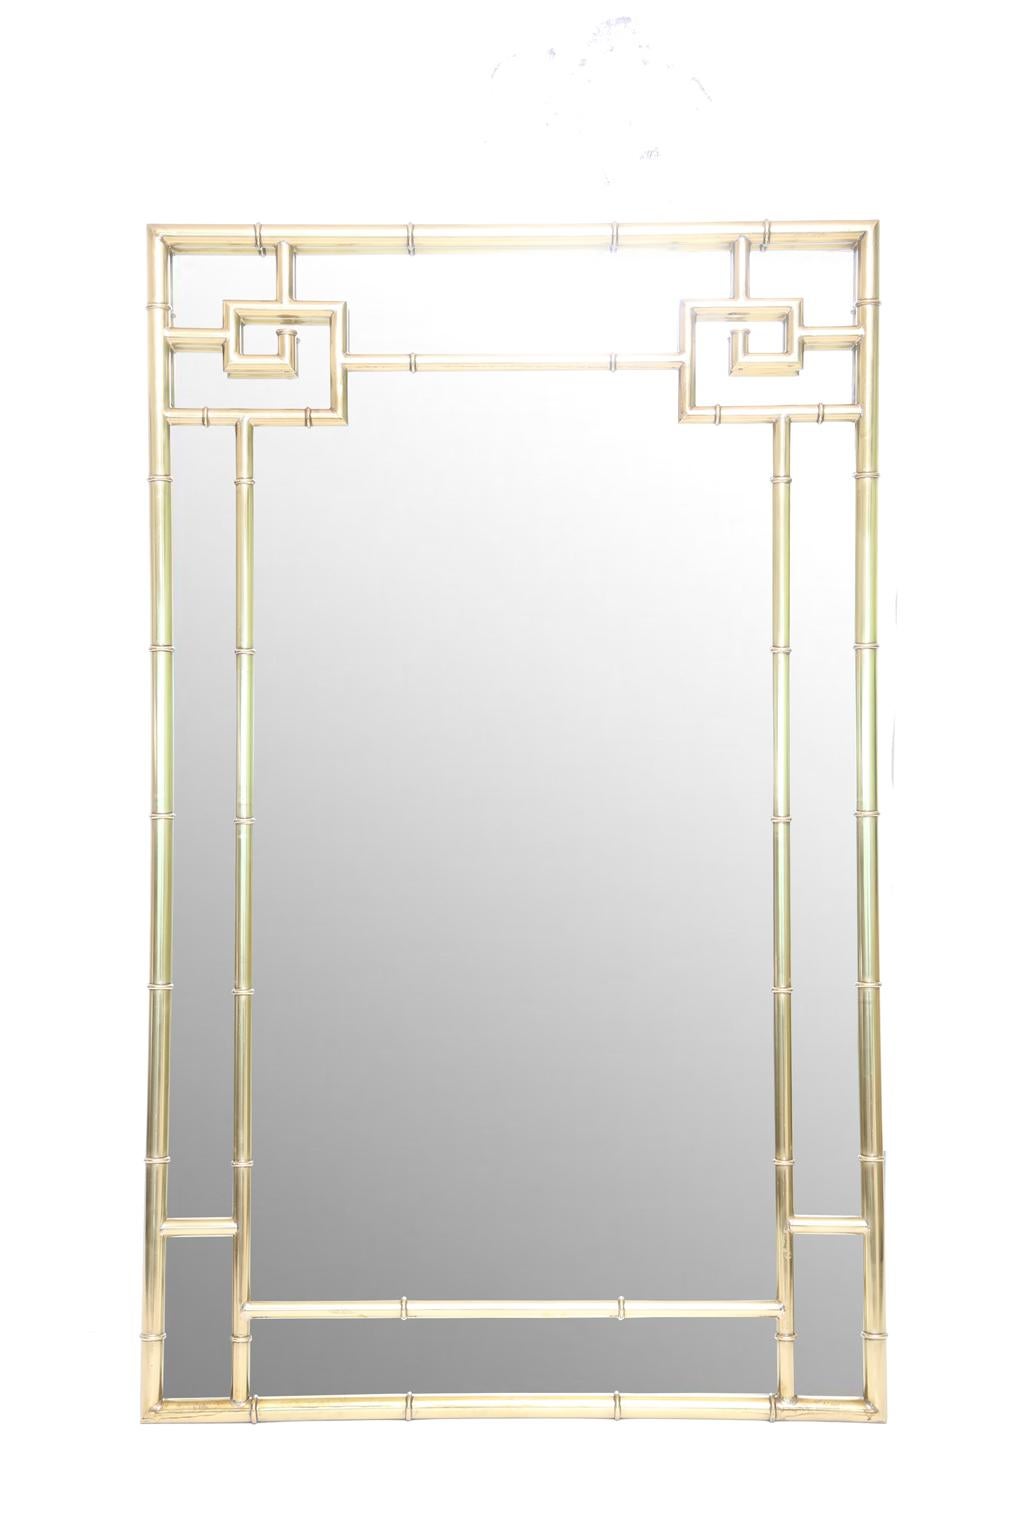 Polished Brass Greek Key Mirror by Bernhard Rohne for Mastercraft In Good Condition For Sale In West Palm Beach, FL